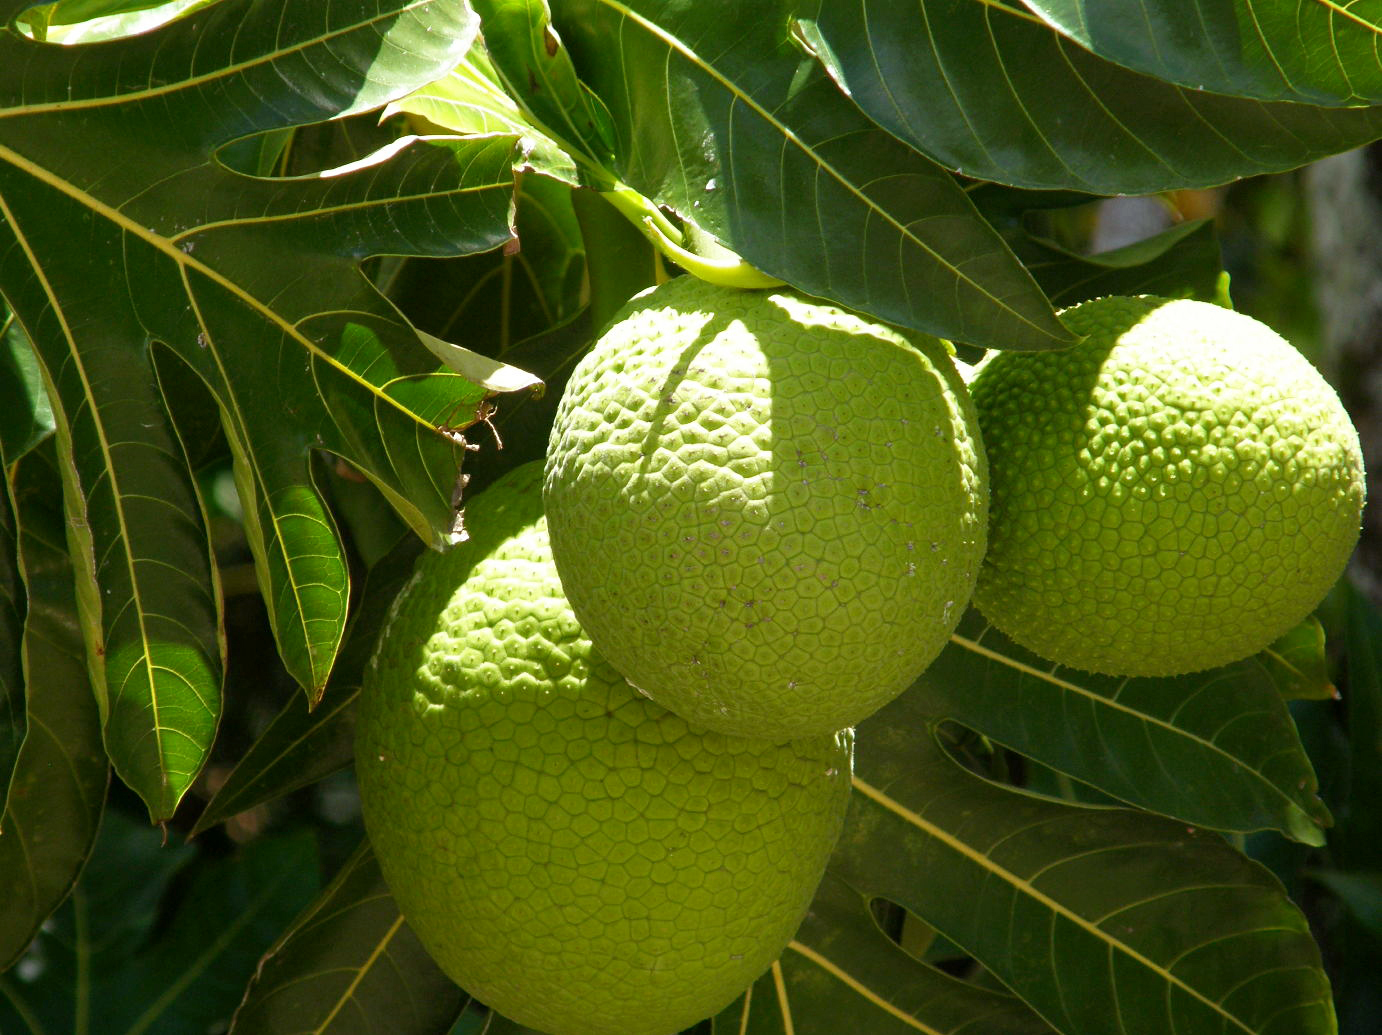 Scientists say breadfruit could be answer to world hunger